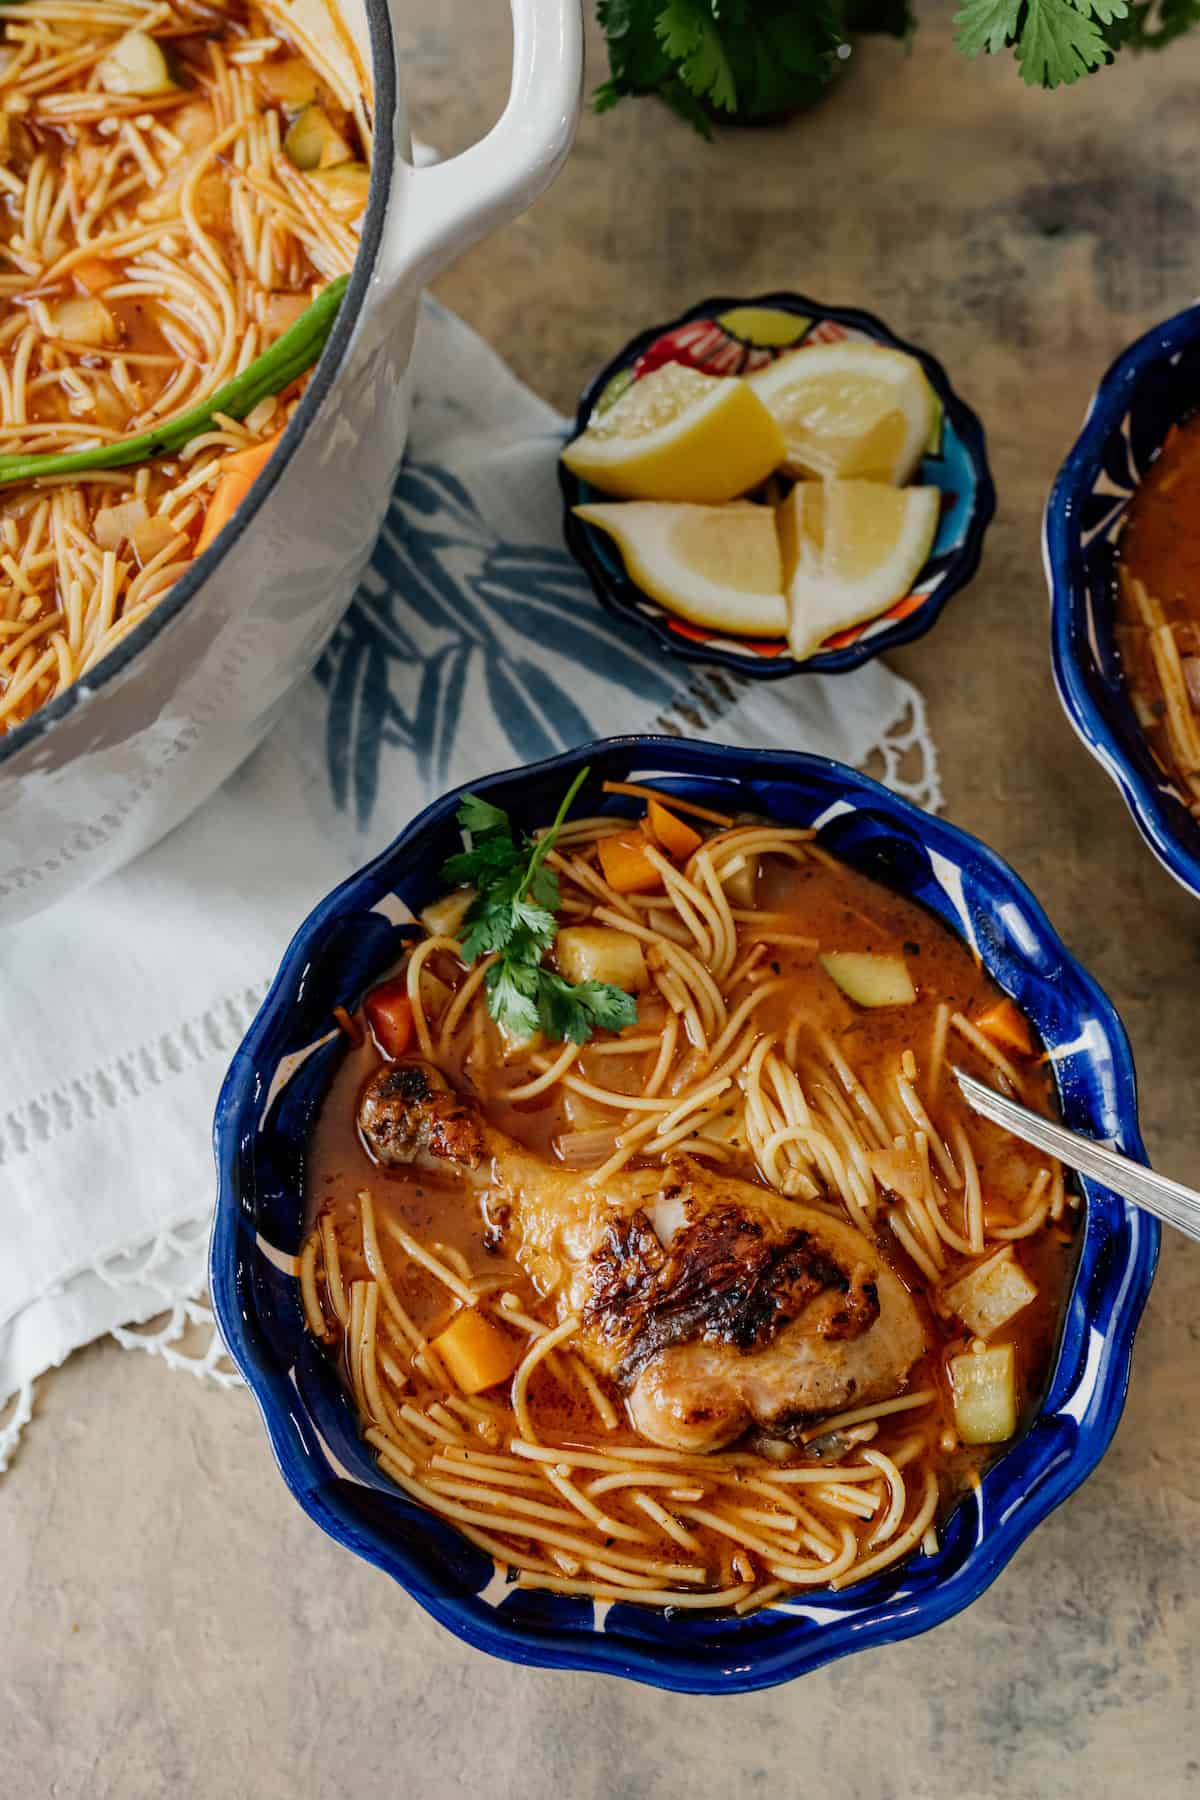 Sopa de Fideos con Pollo, a Mexican version of chicken noodle soup in a Mexican blue bowl with a side of lemons